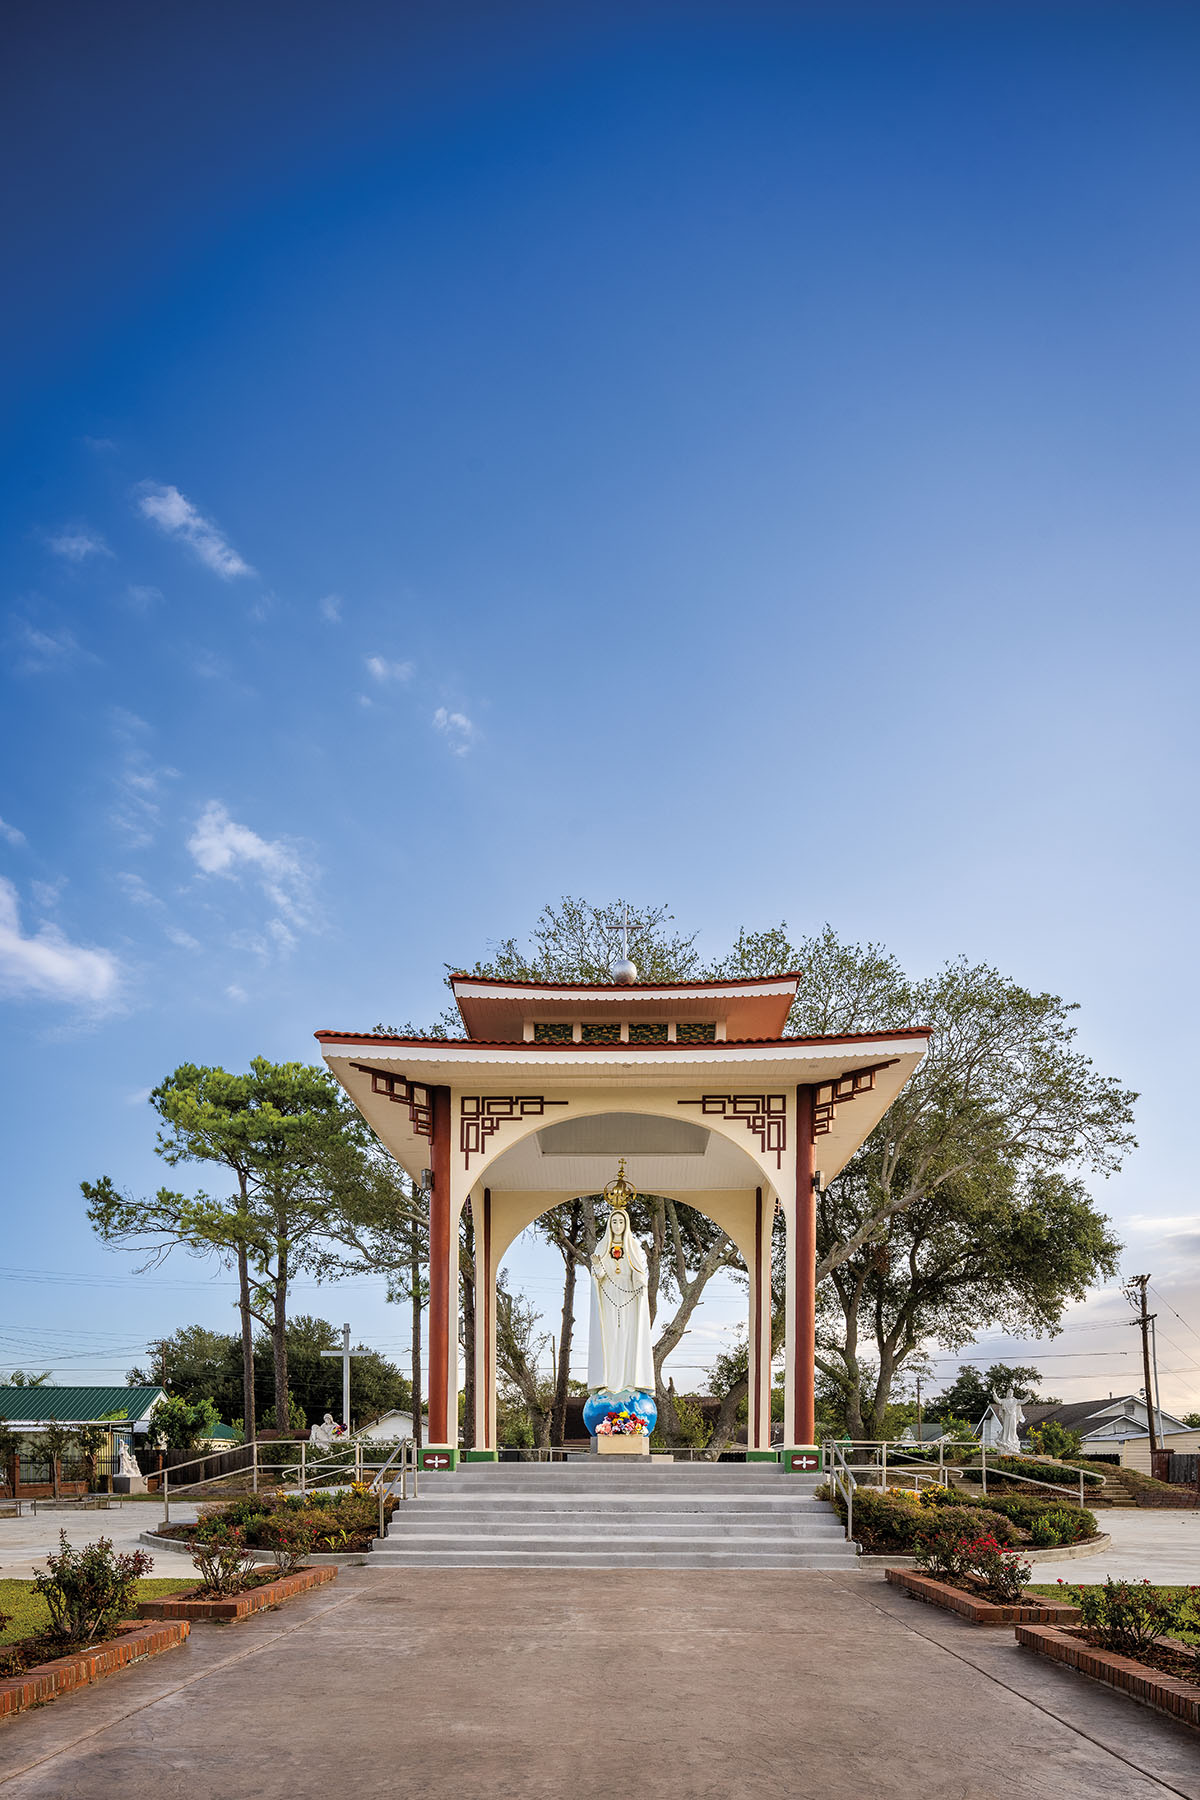 Curved, Vietnamese-style architecture in maroon and ivory adorn a sculpture of a female figure under a large blue sky